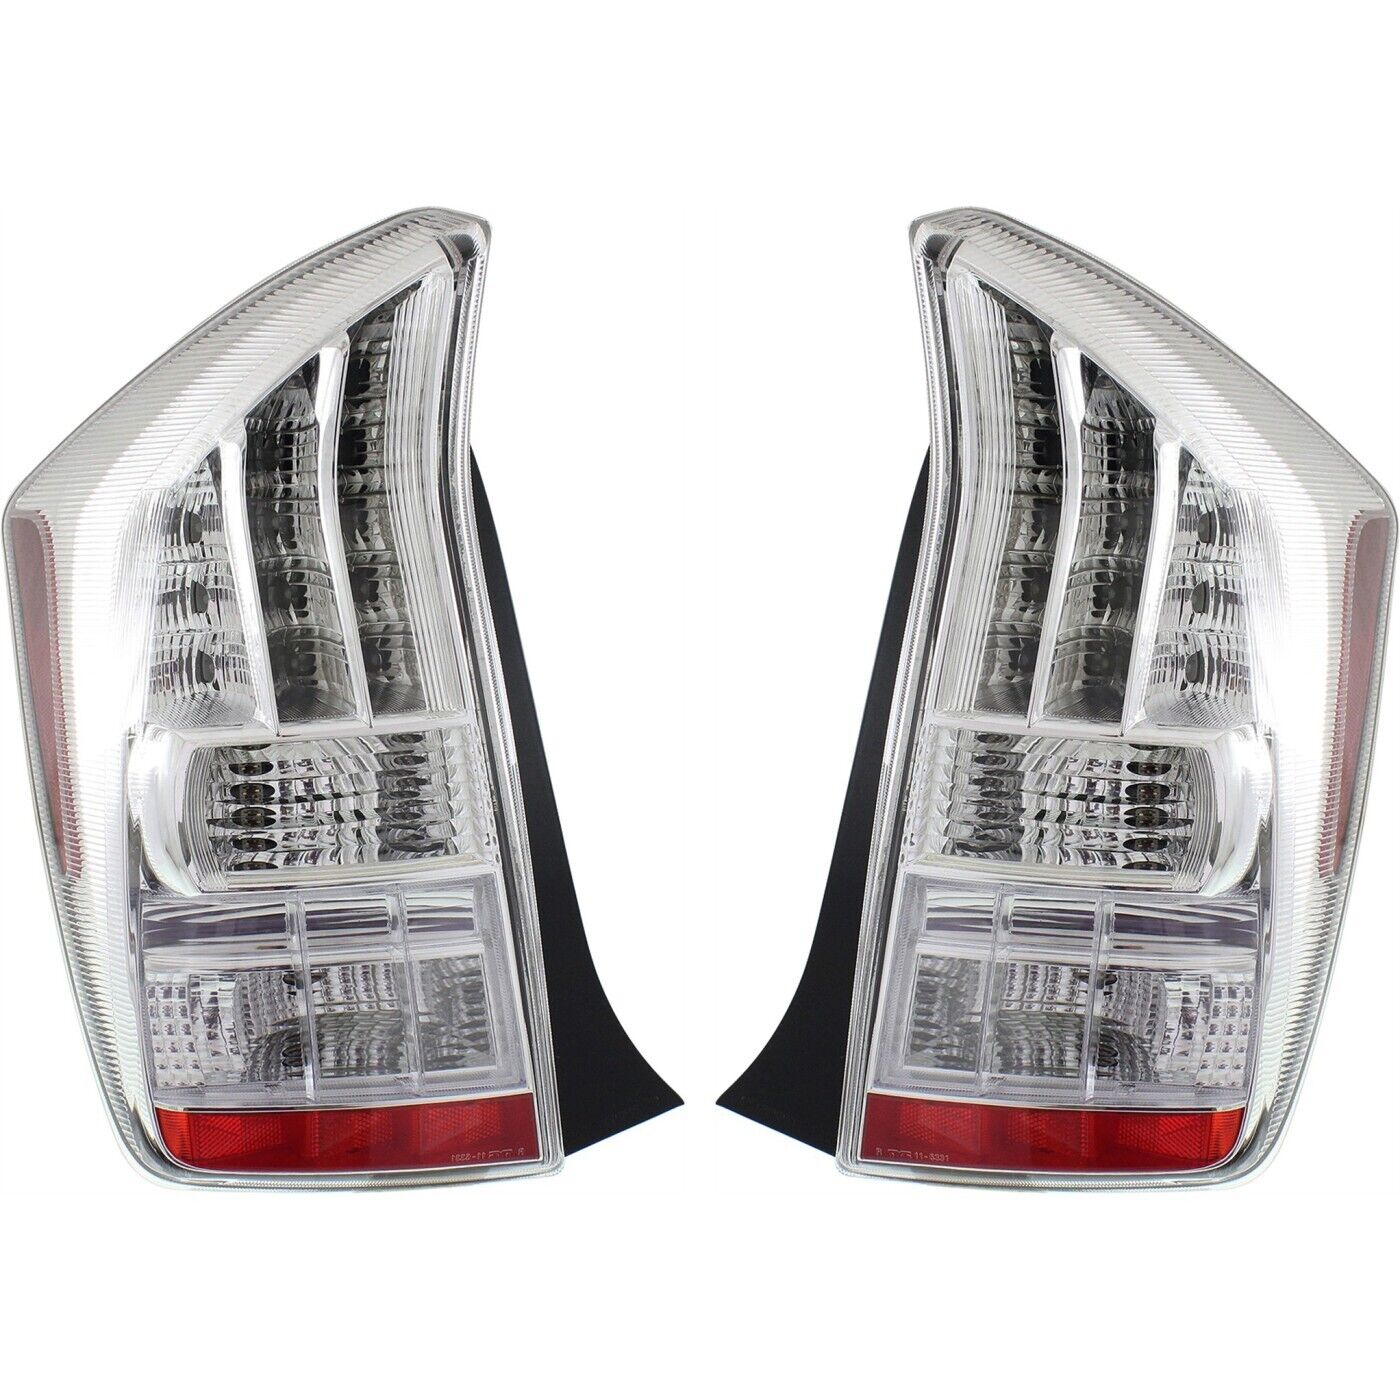 Set of 2 Tail Lights Taillights Taillamps Brakelights  Driver & Passenger Pair